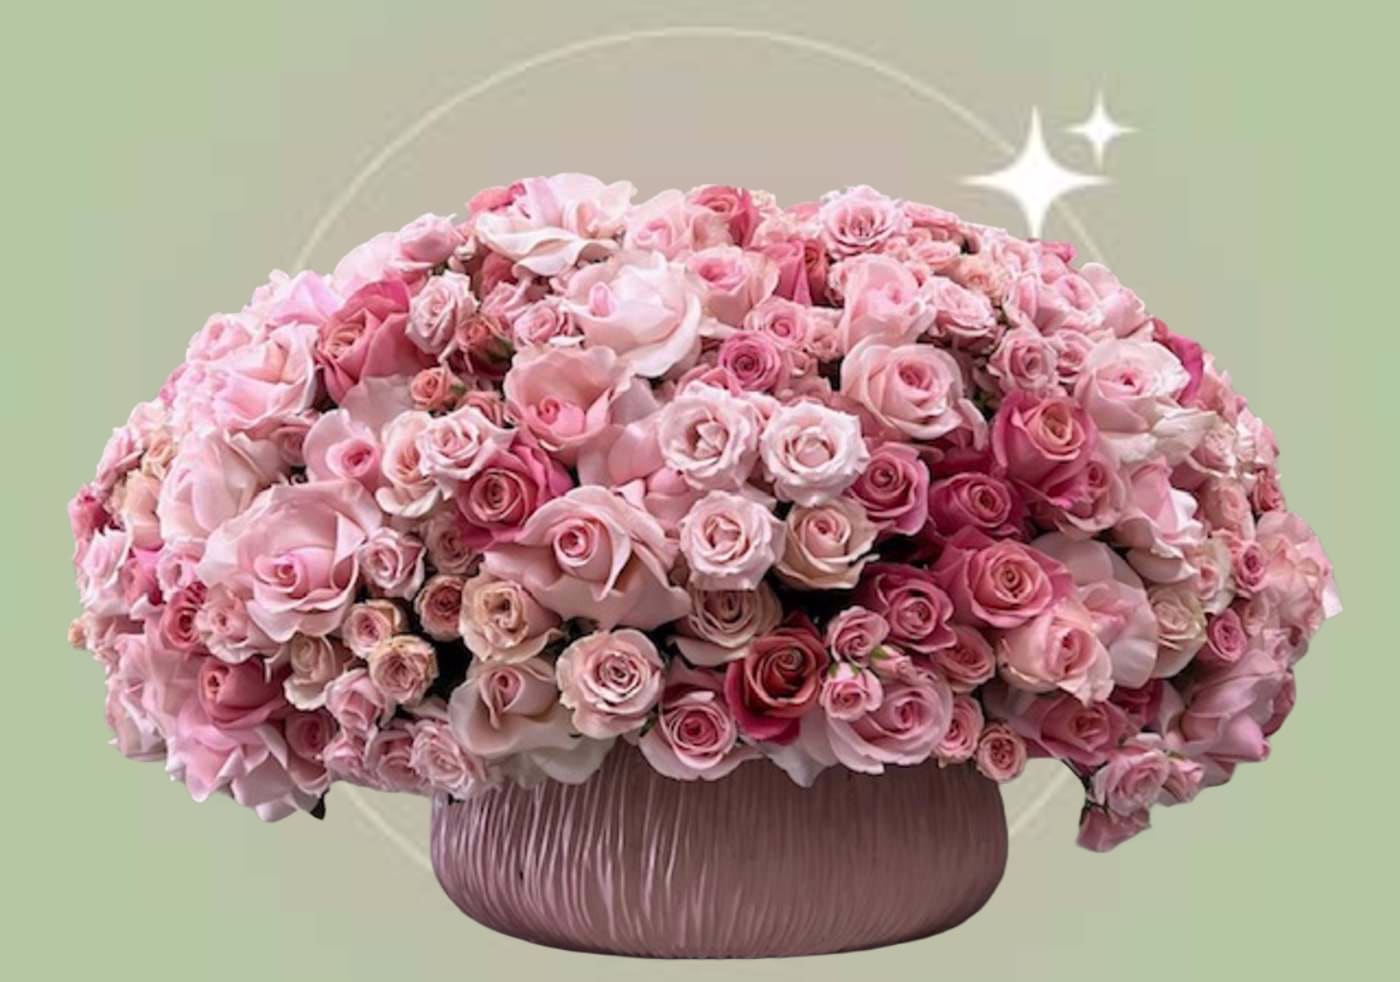 Cotton Candy Dreams - PLEASE NOTE: Although we make all the effort to create a floral arrangement as close to the photo shown, the actual arrangement delivered may vary slightly in its appearance from the photo shown. If you have any questions about your order, we welcome you to call us in or email us to discuss further. Thank you!